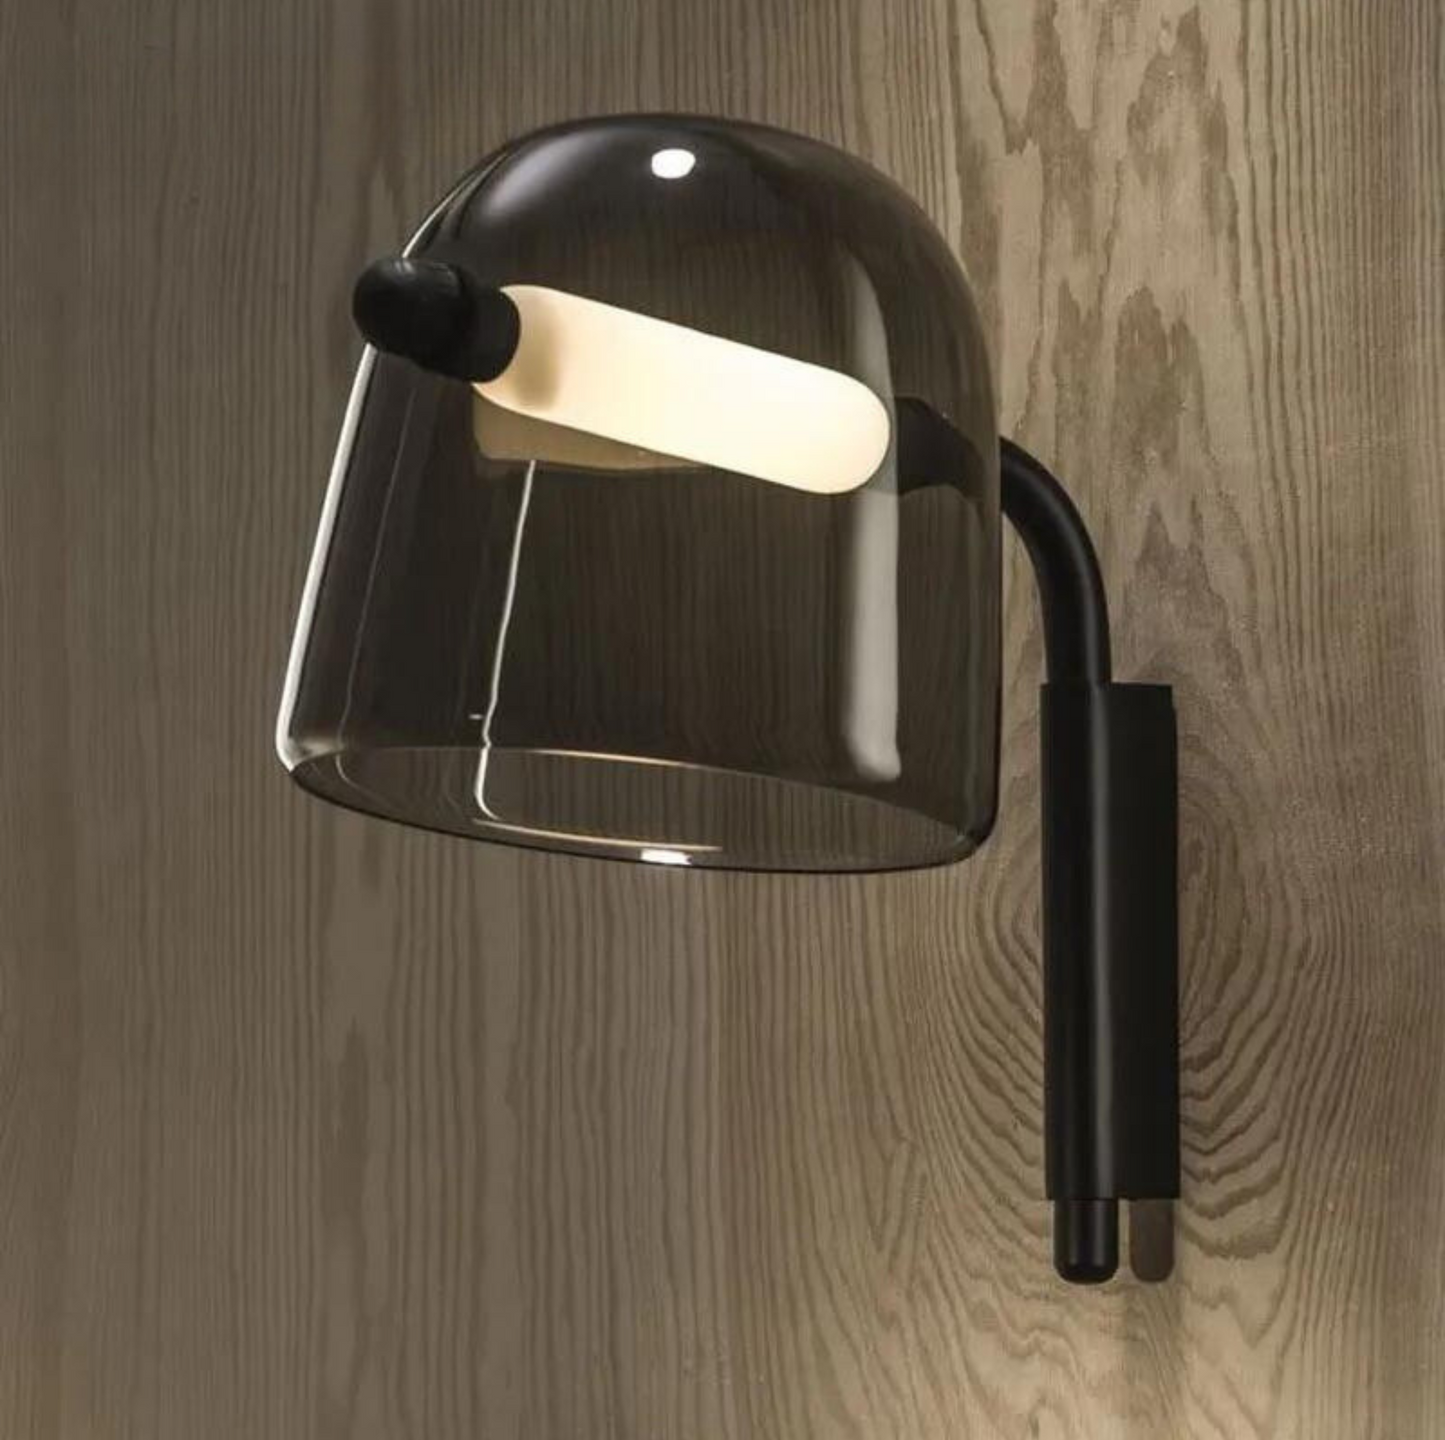 Unique Nordic Design Iron Glass Led Wall Sconce Light Creative Design Smoky and Amber Modern Decorative Light Fixture For Bedroom, Office, Corridor by Gloss (MB3202)